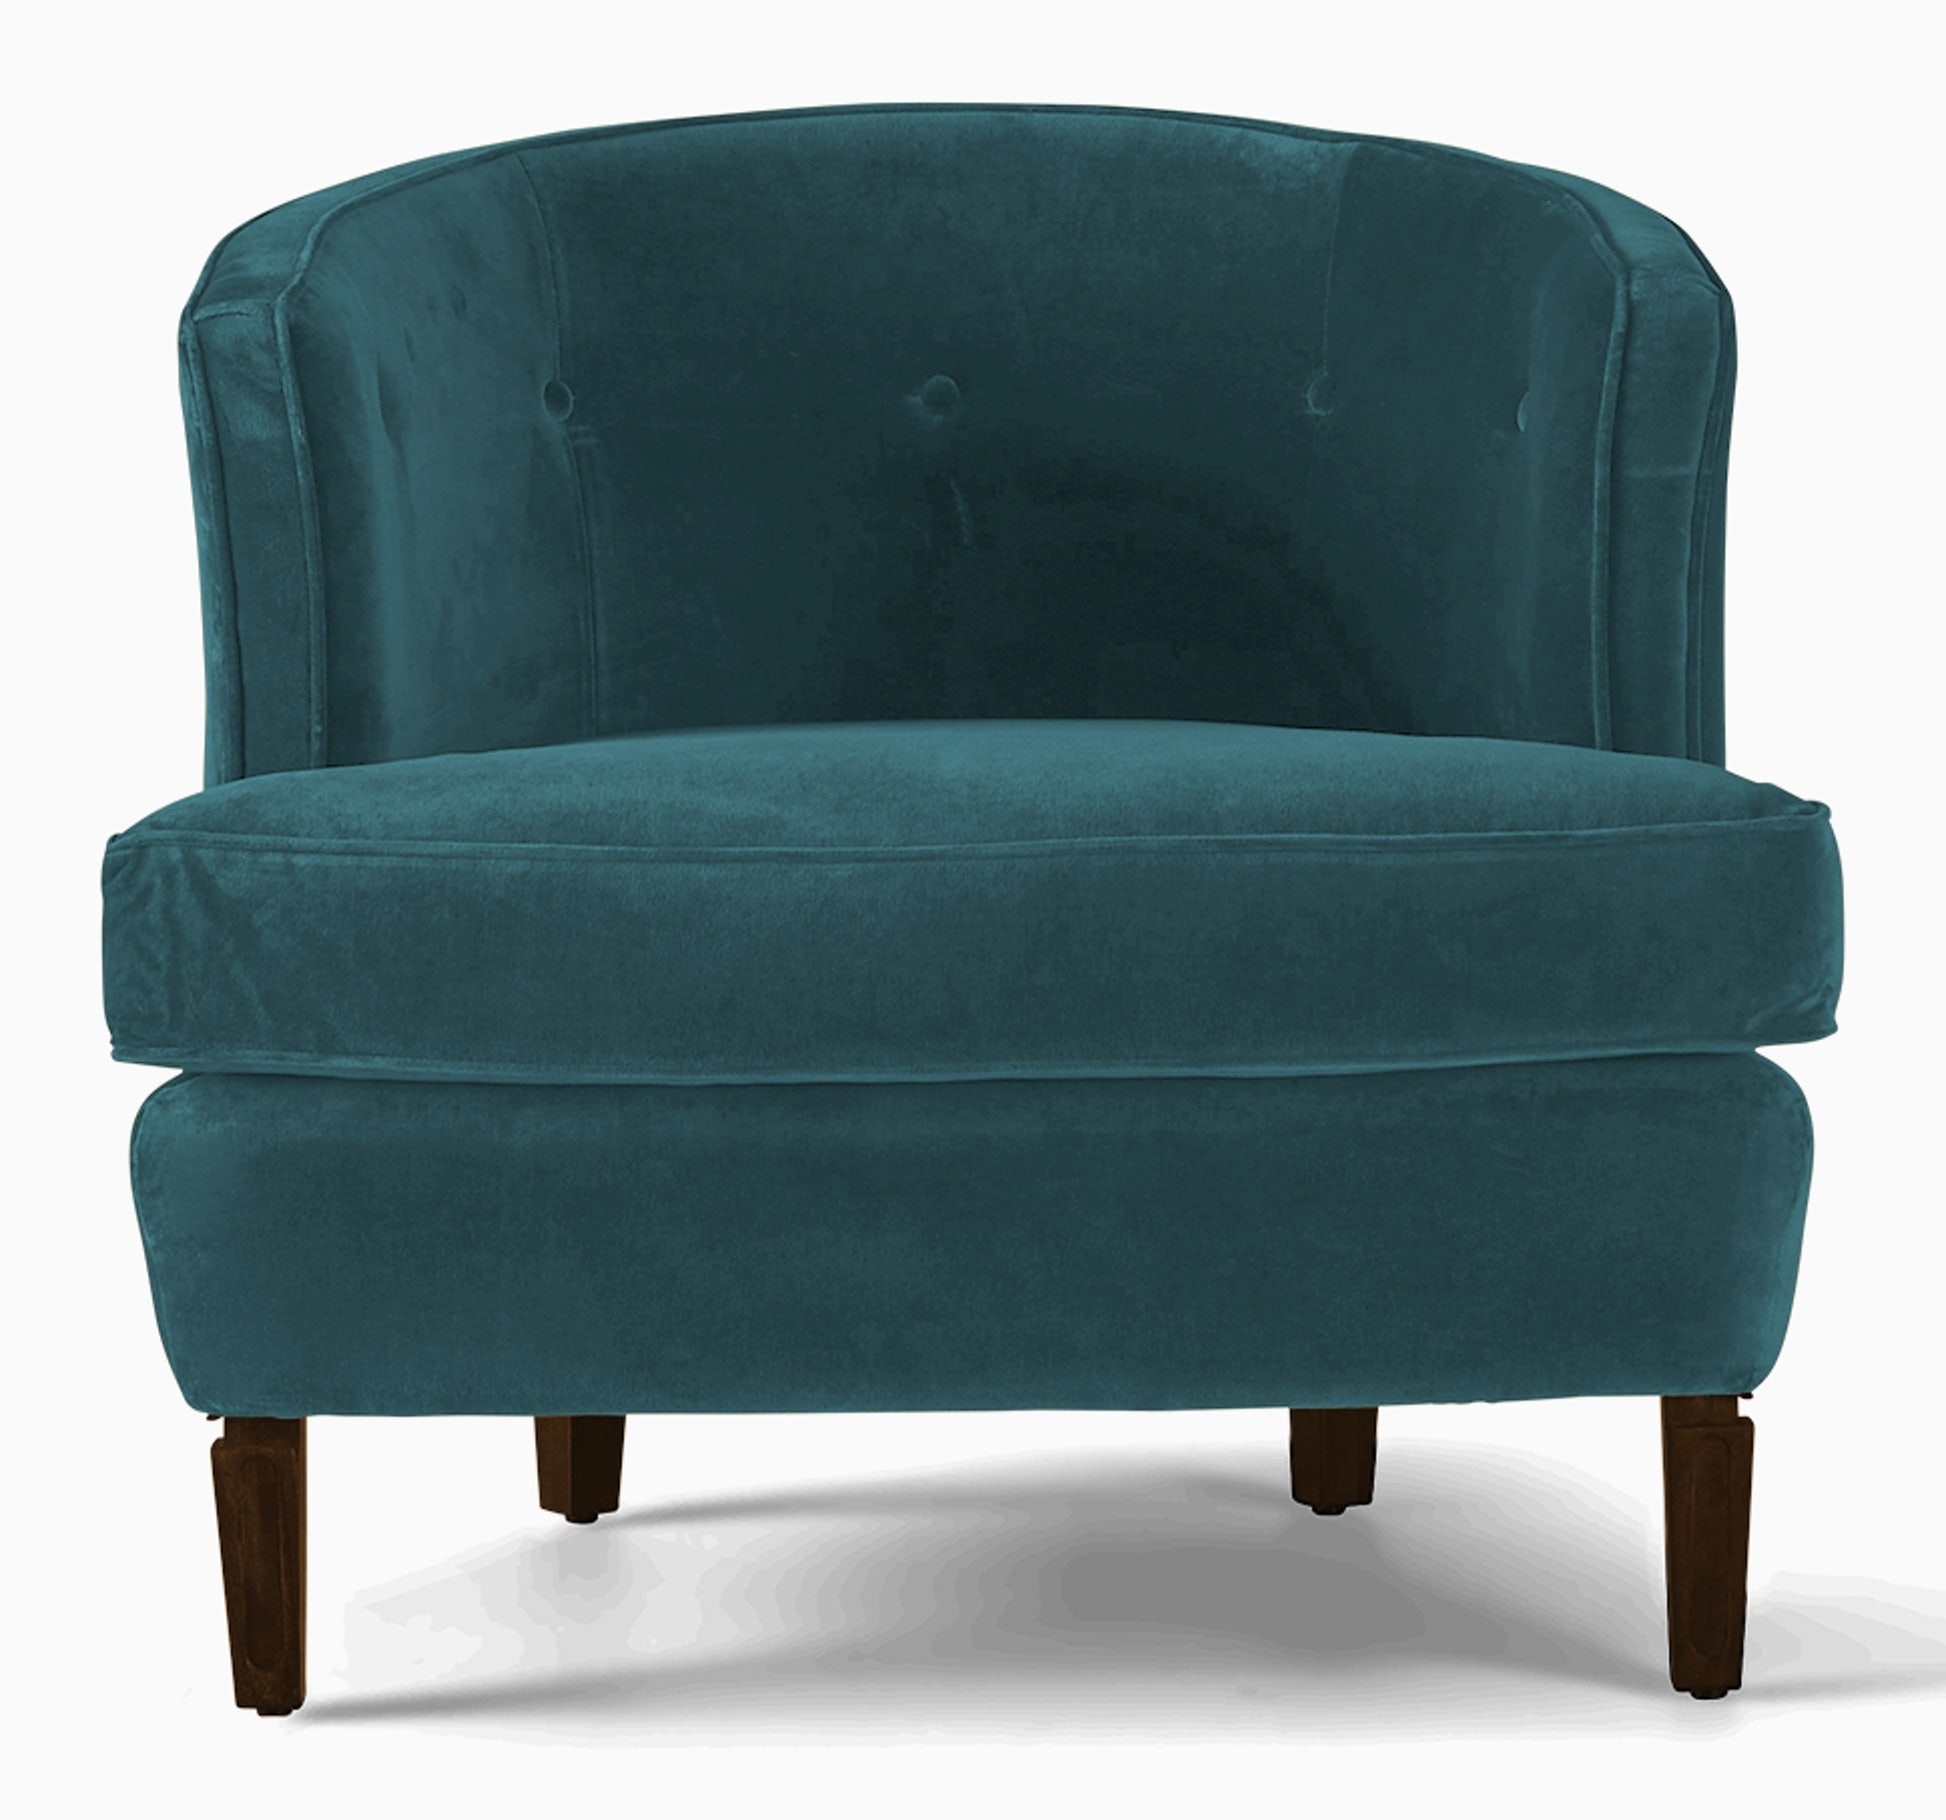 Blue Leigh Mid Century Modern Chair - Lucky Turquoise - Coffee Bean - Image 1